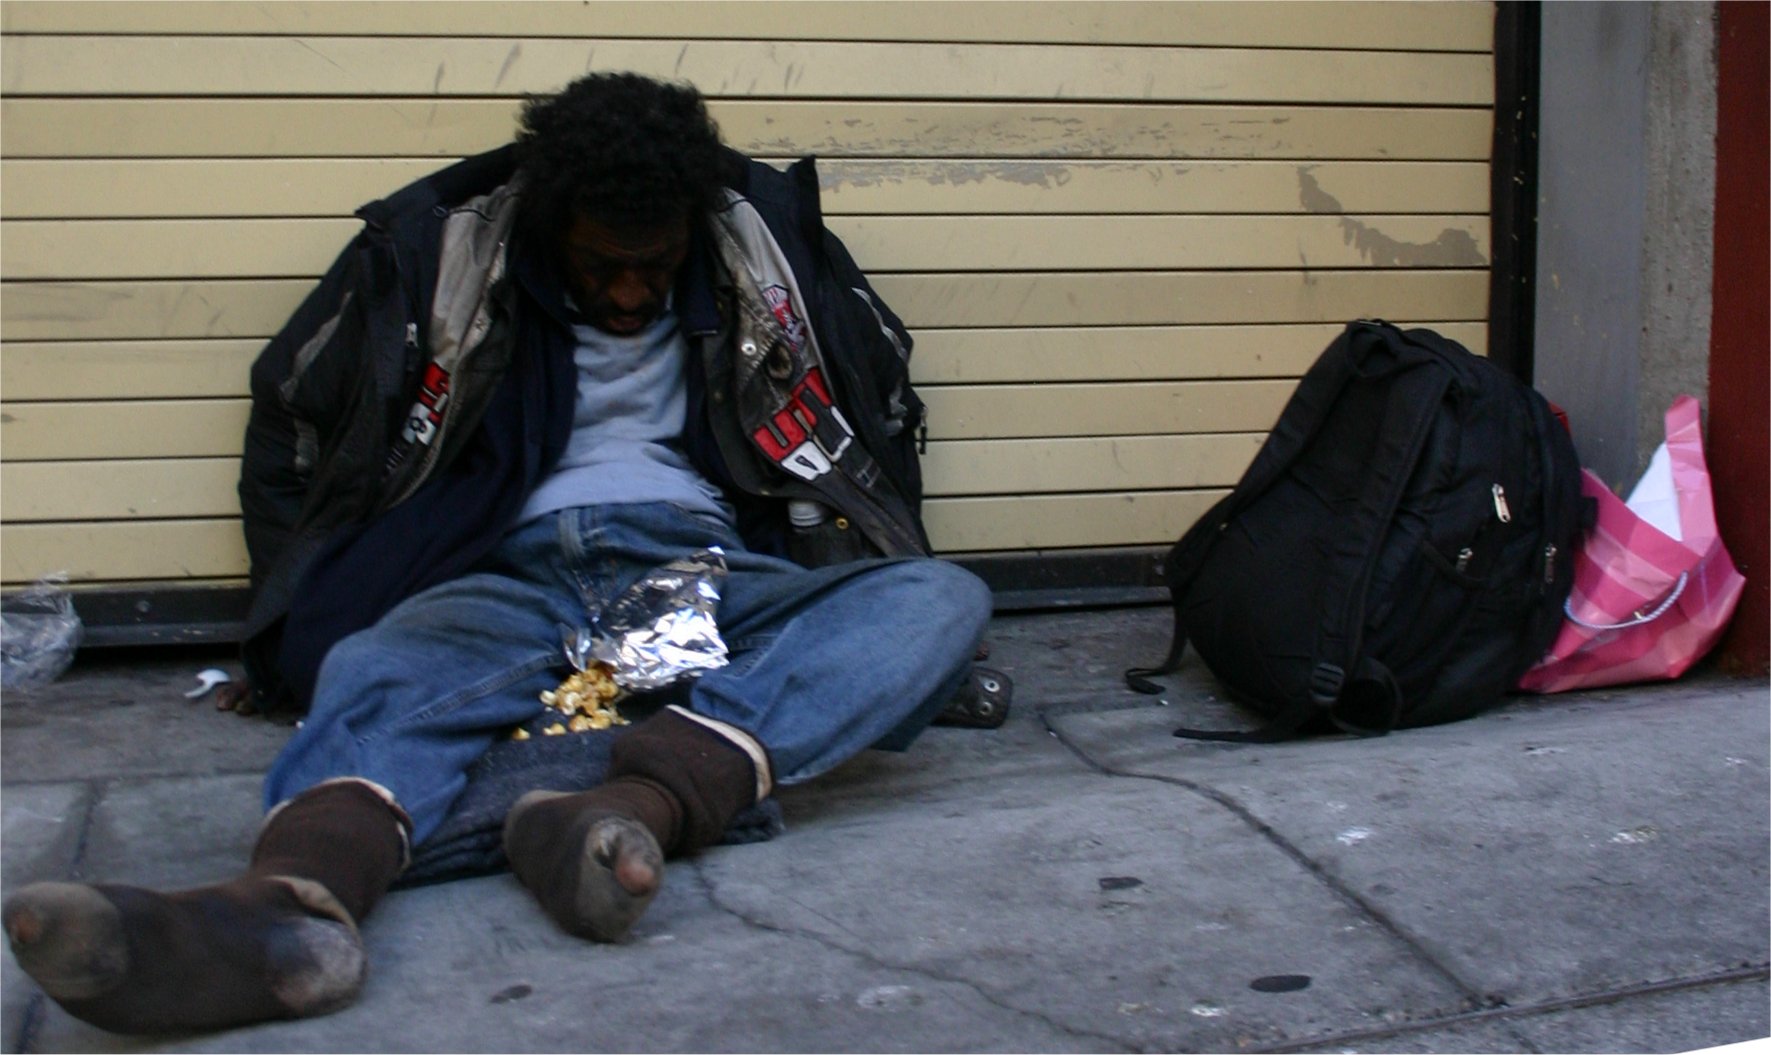 I saw this homeless guy the other day, head down, asleep: Wearing 4 jackets...